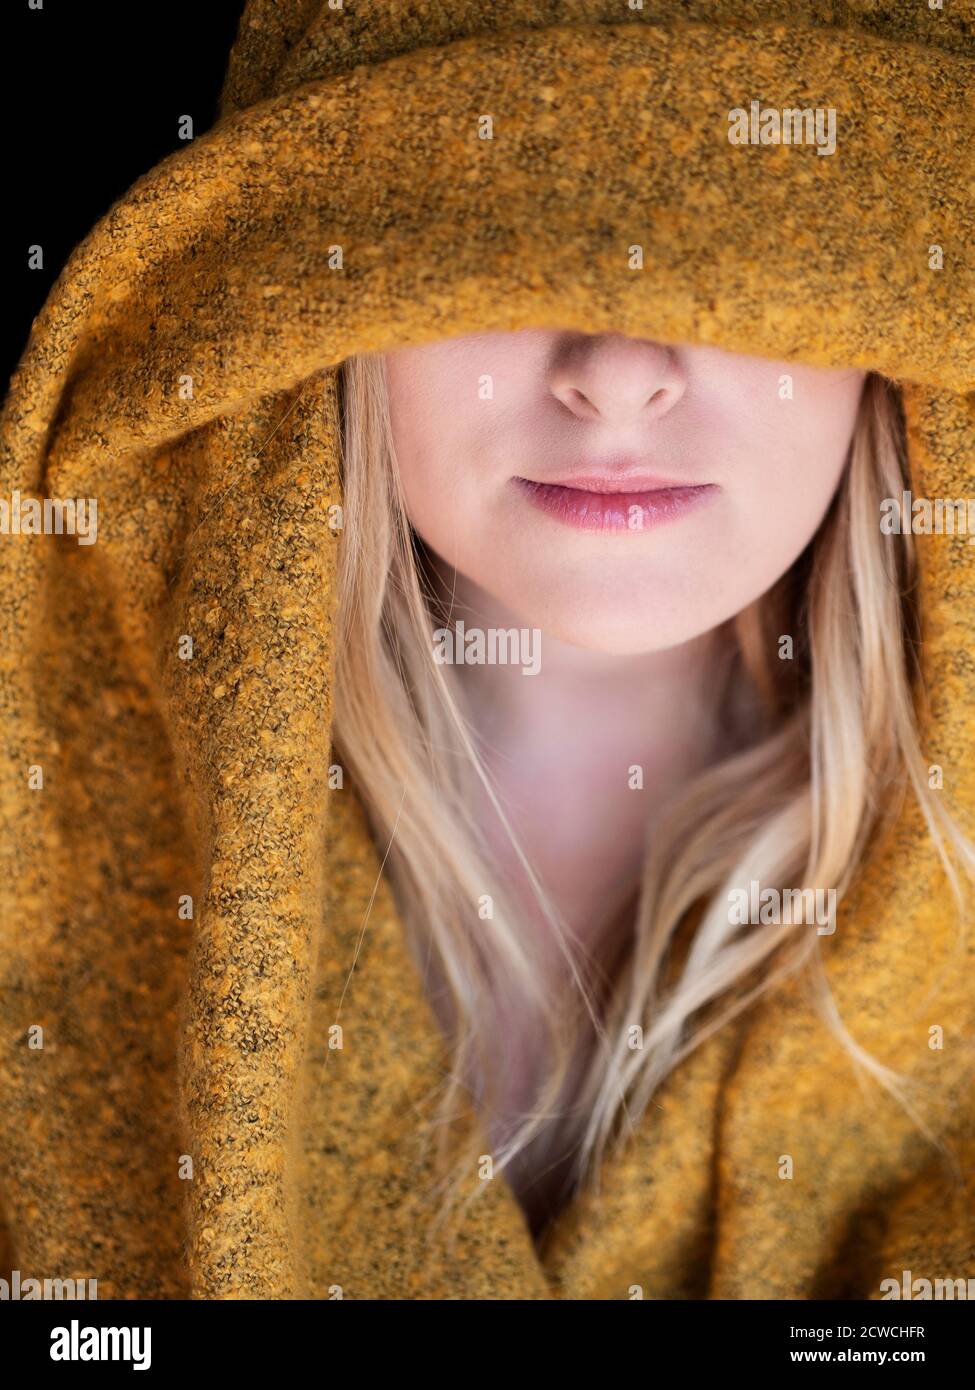 Blond woman with yellow hoodie covering part of her face Stock Photo